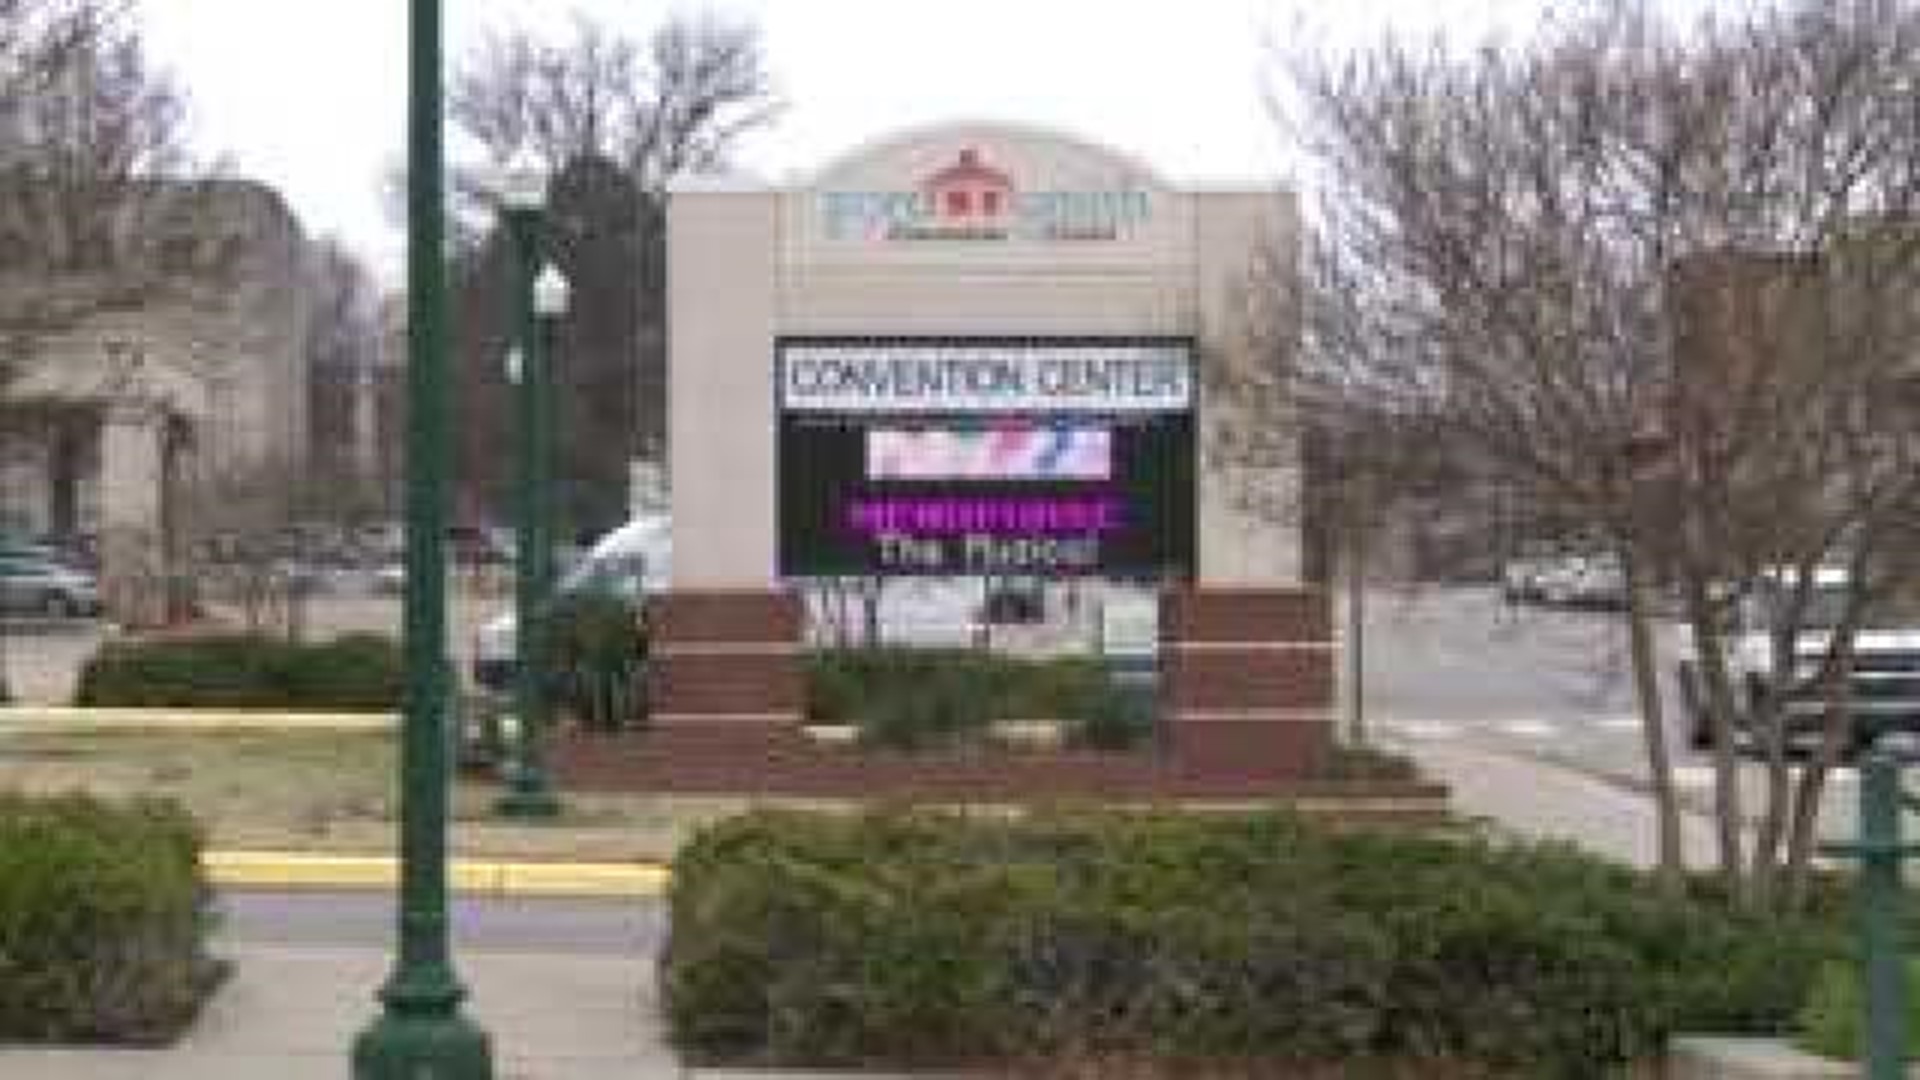 Revenue Up, Costs Down at Fort Smith Convention Center